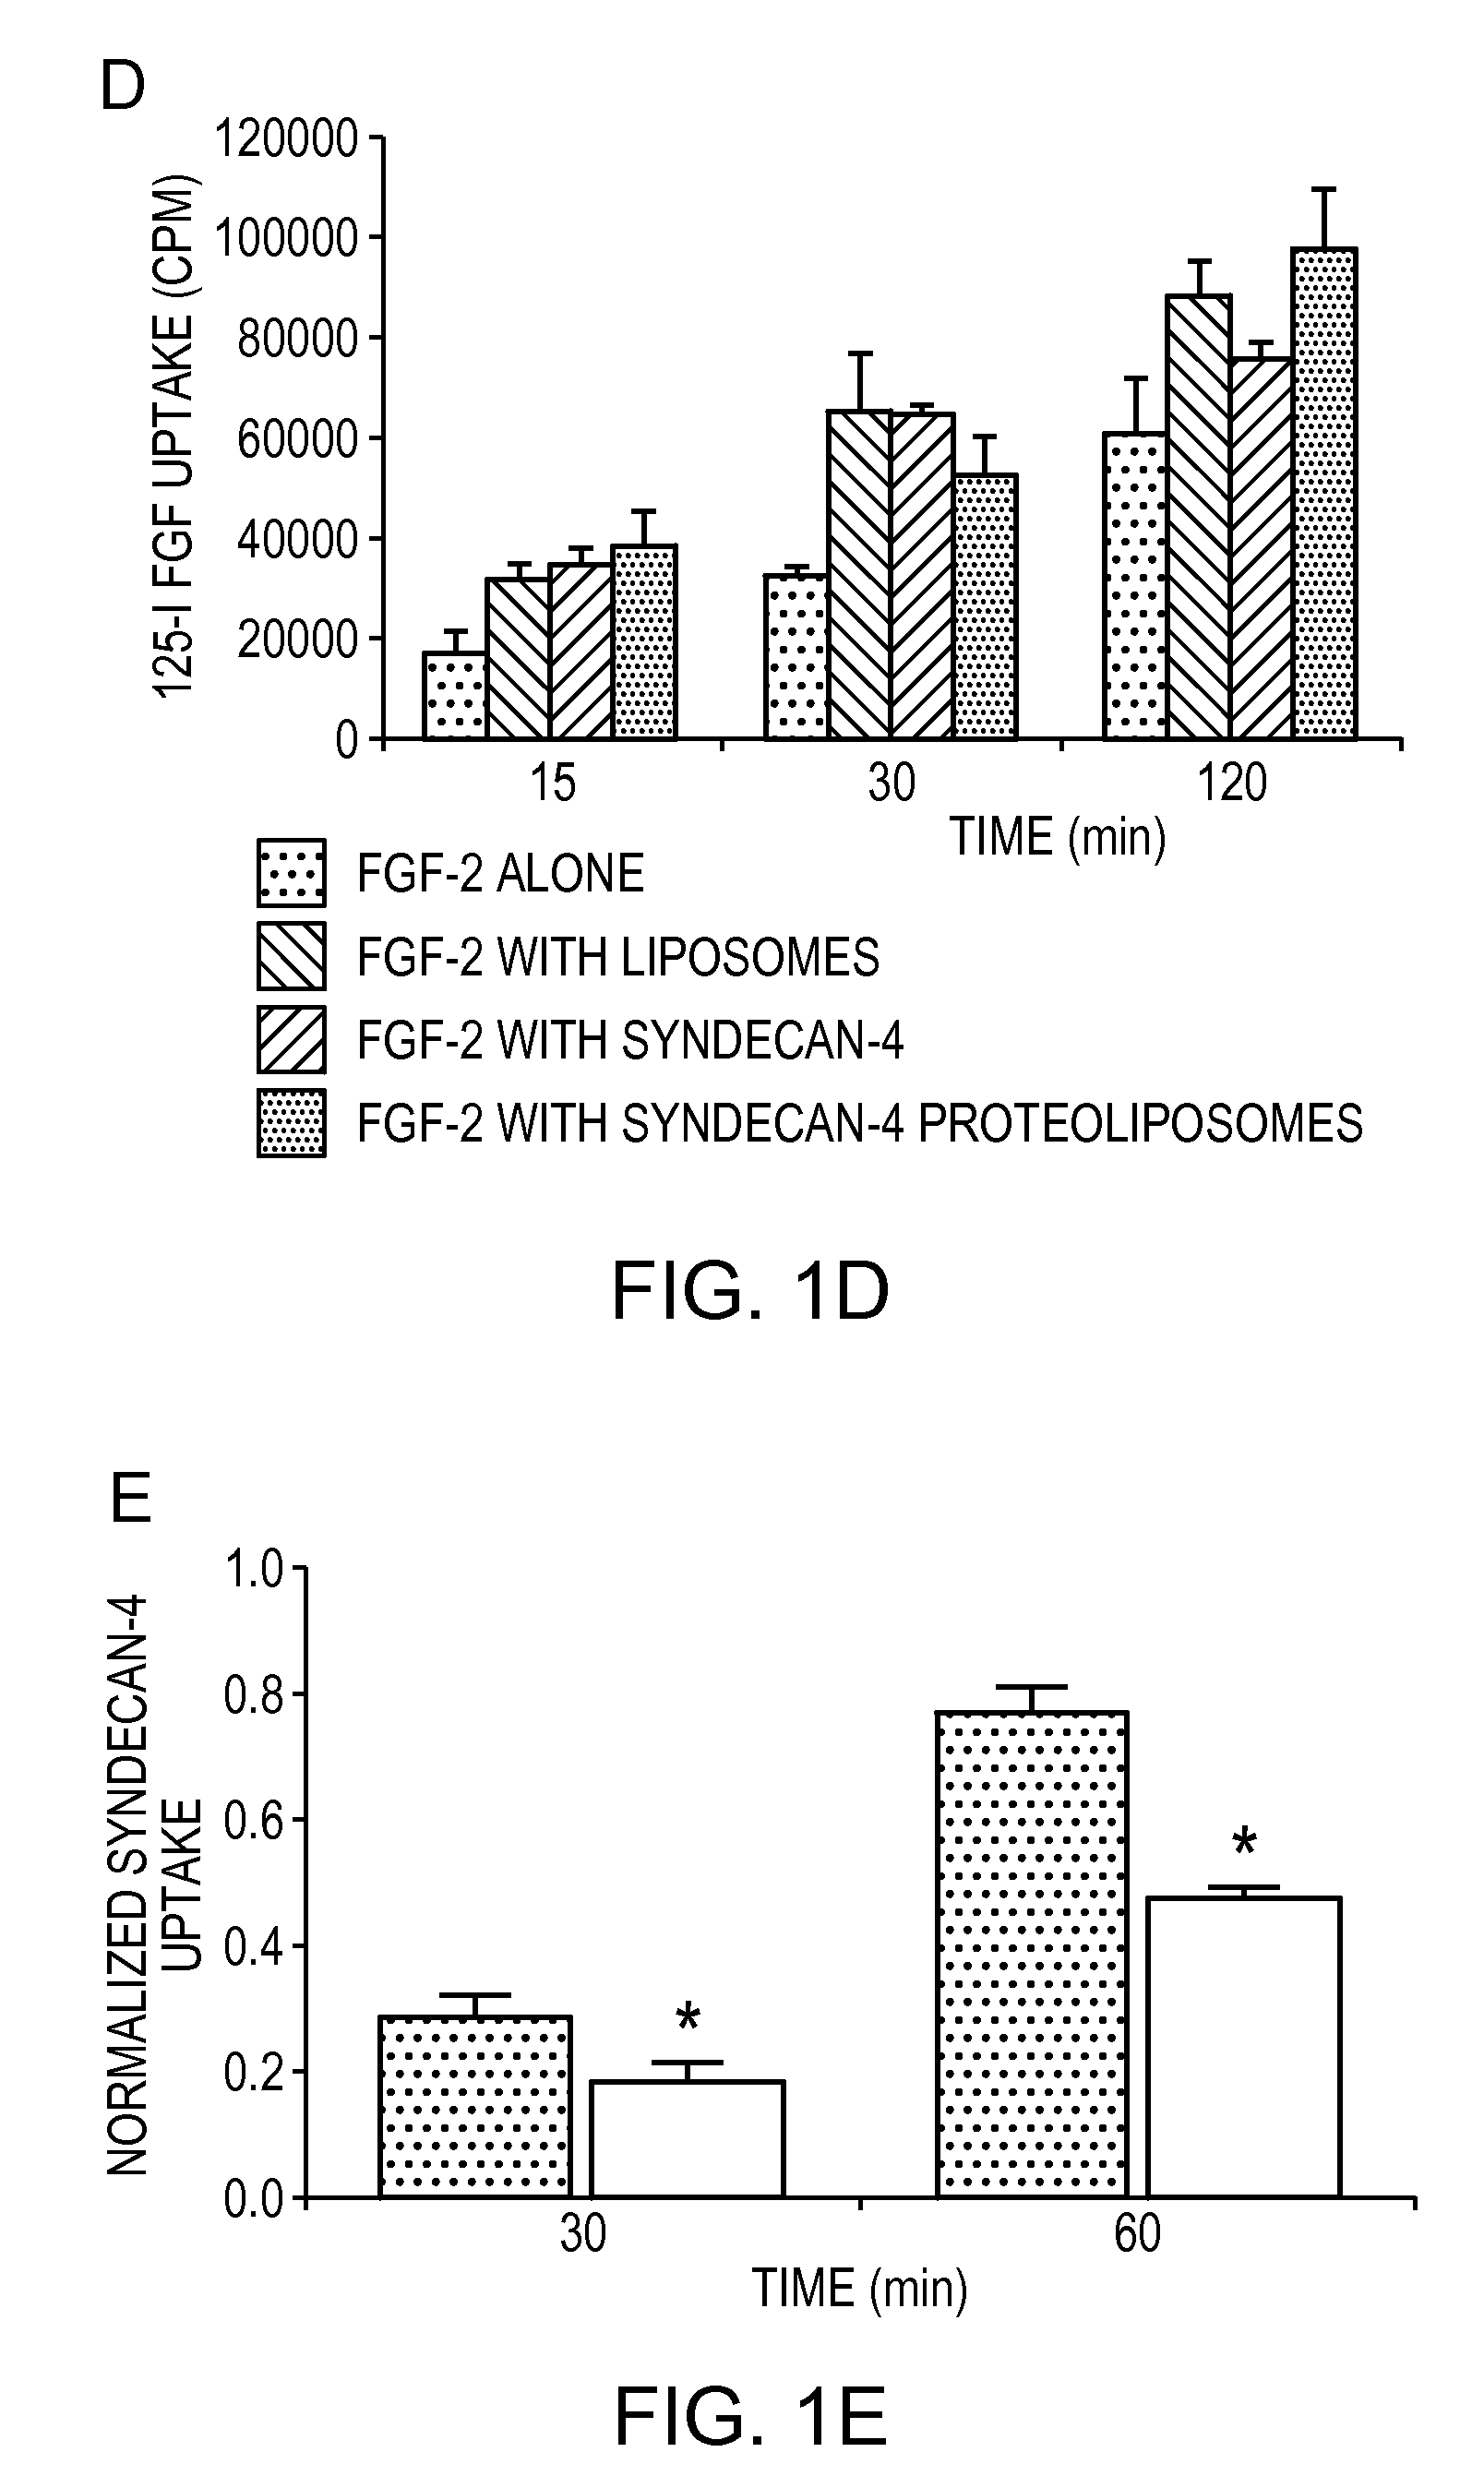 Simultaneous Delivery of Receptors and/or Co-Receptors for Growth Factor Stability and Activity